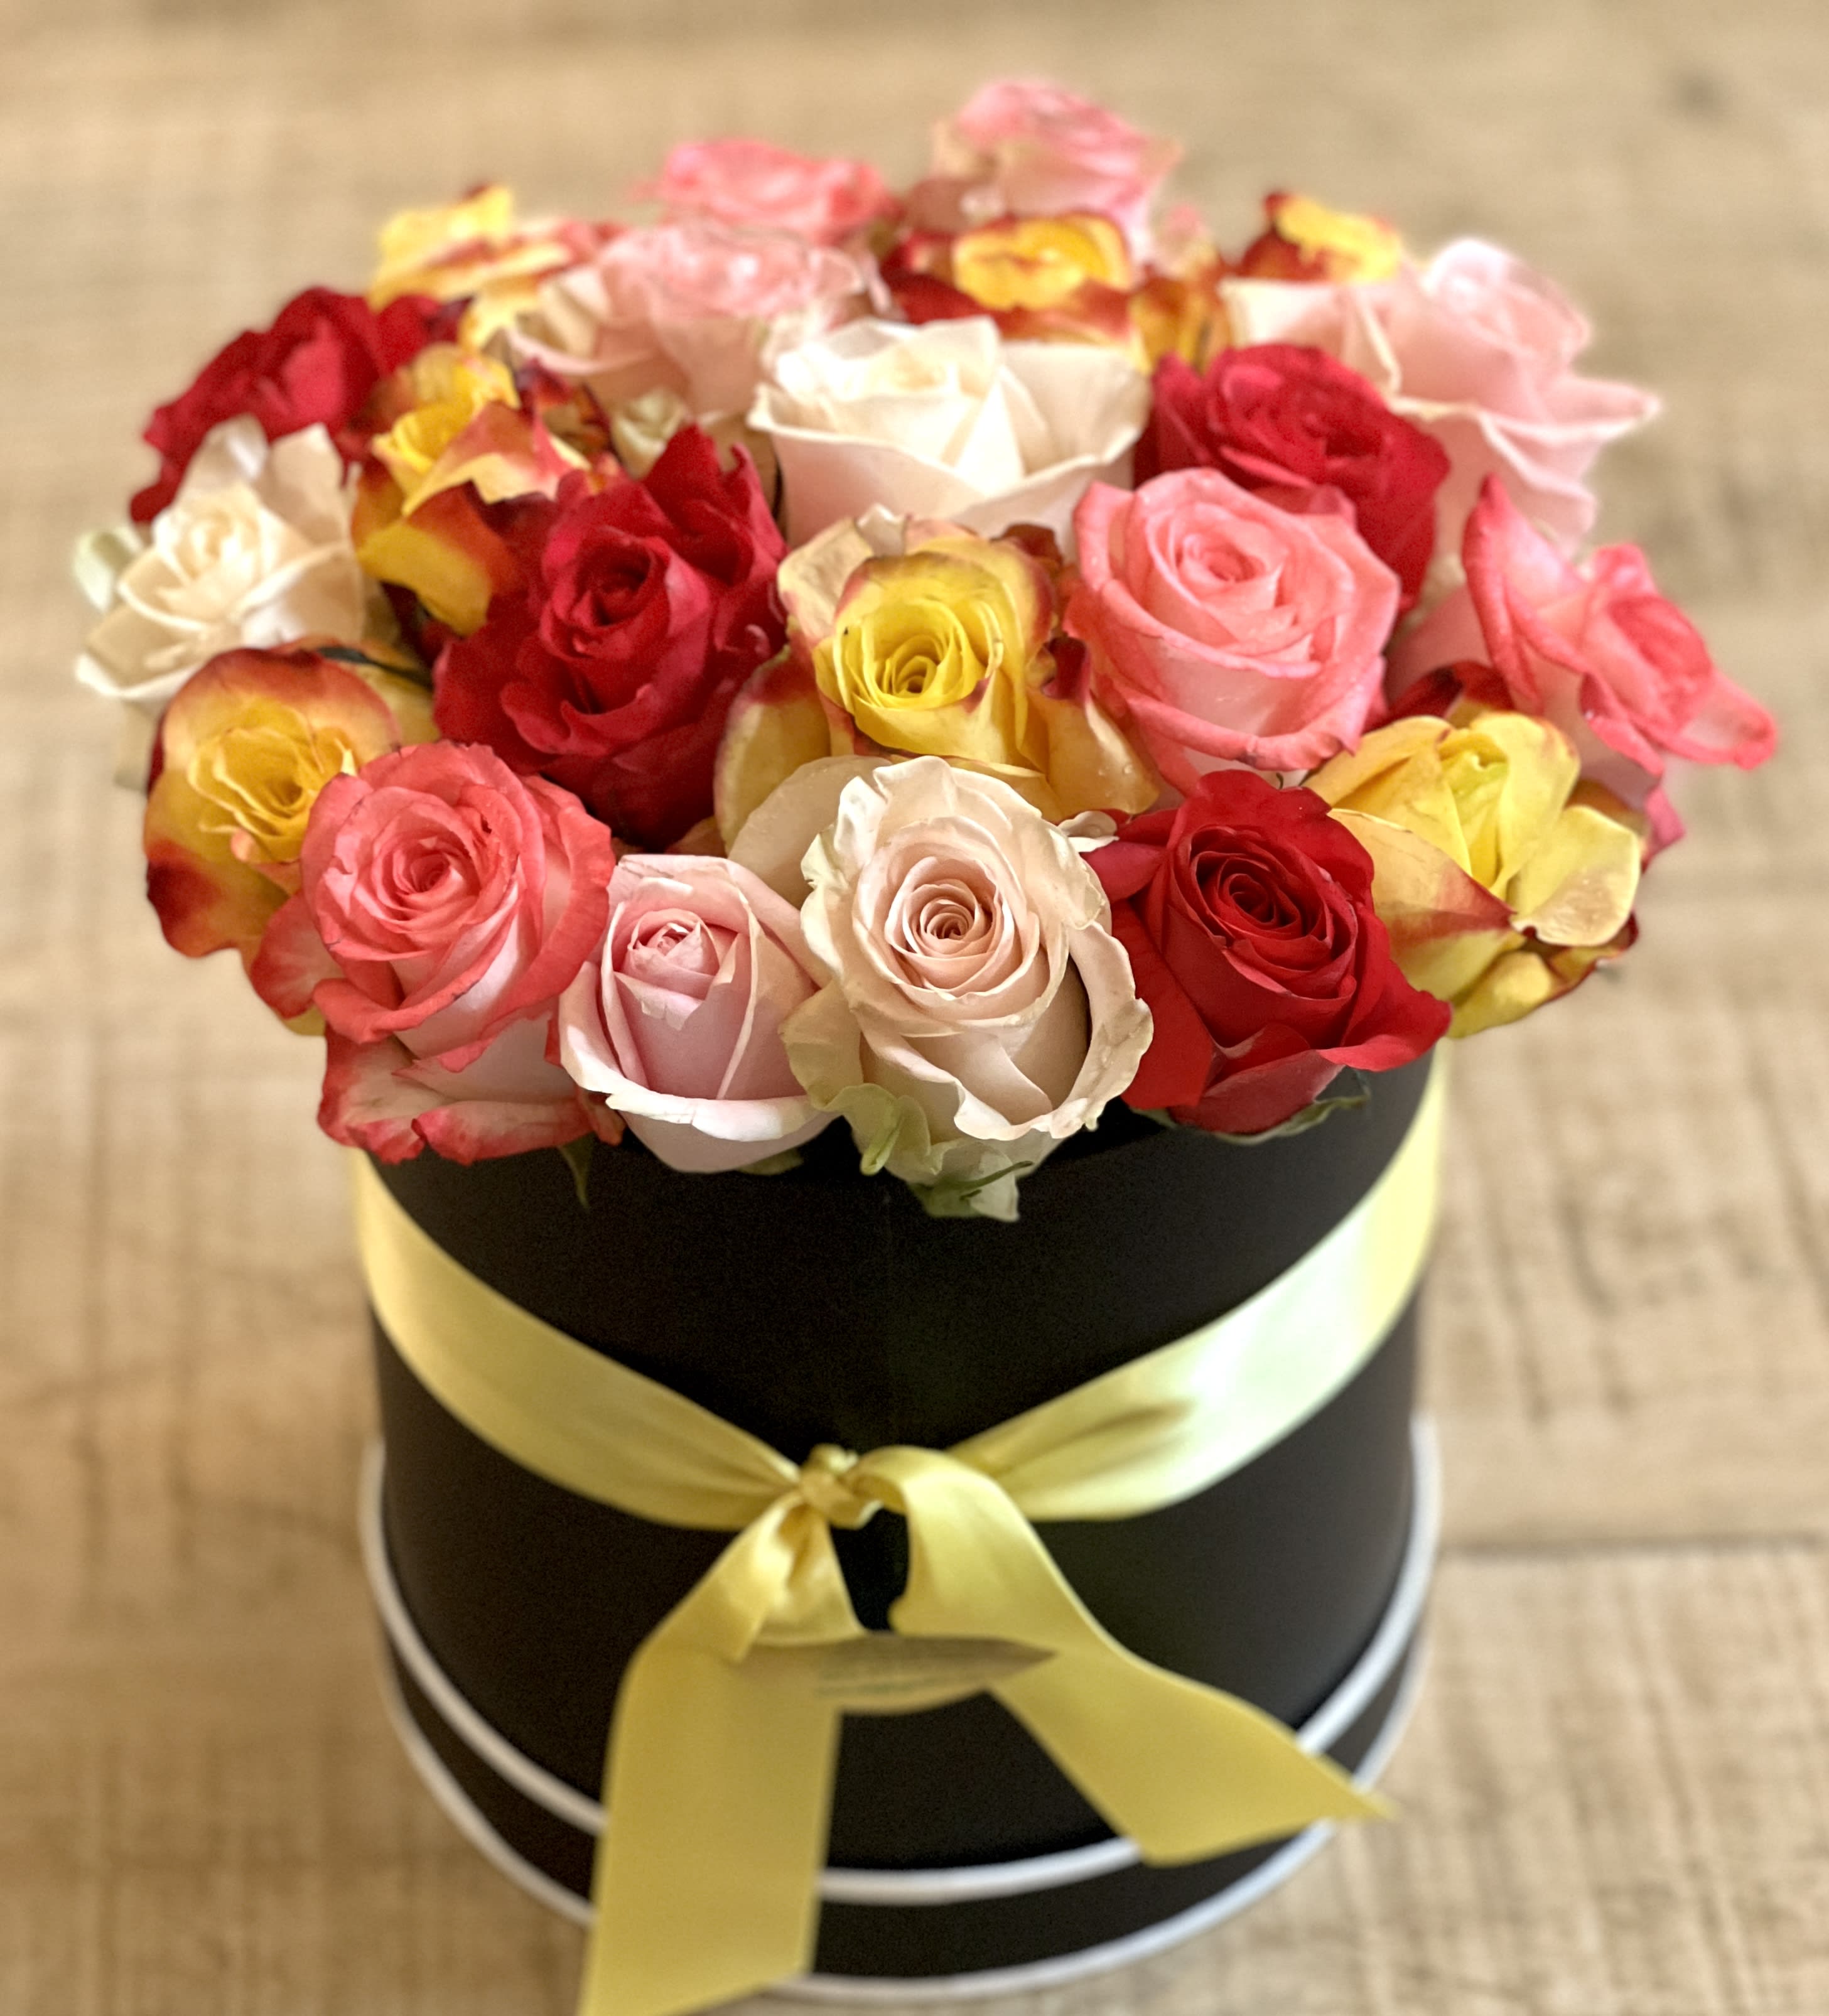 Deluxe Mixed Color Rose Hatbox - This gorgeous deluxe hatbox full of 24 beautiful mixed color roses makes a perfect gift for any occasion!